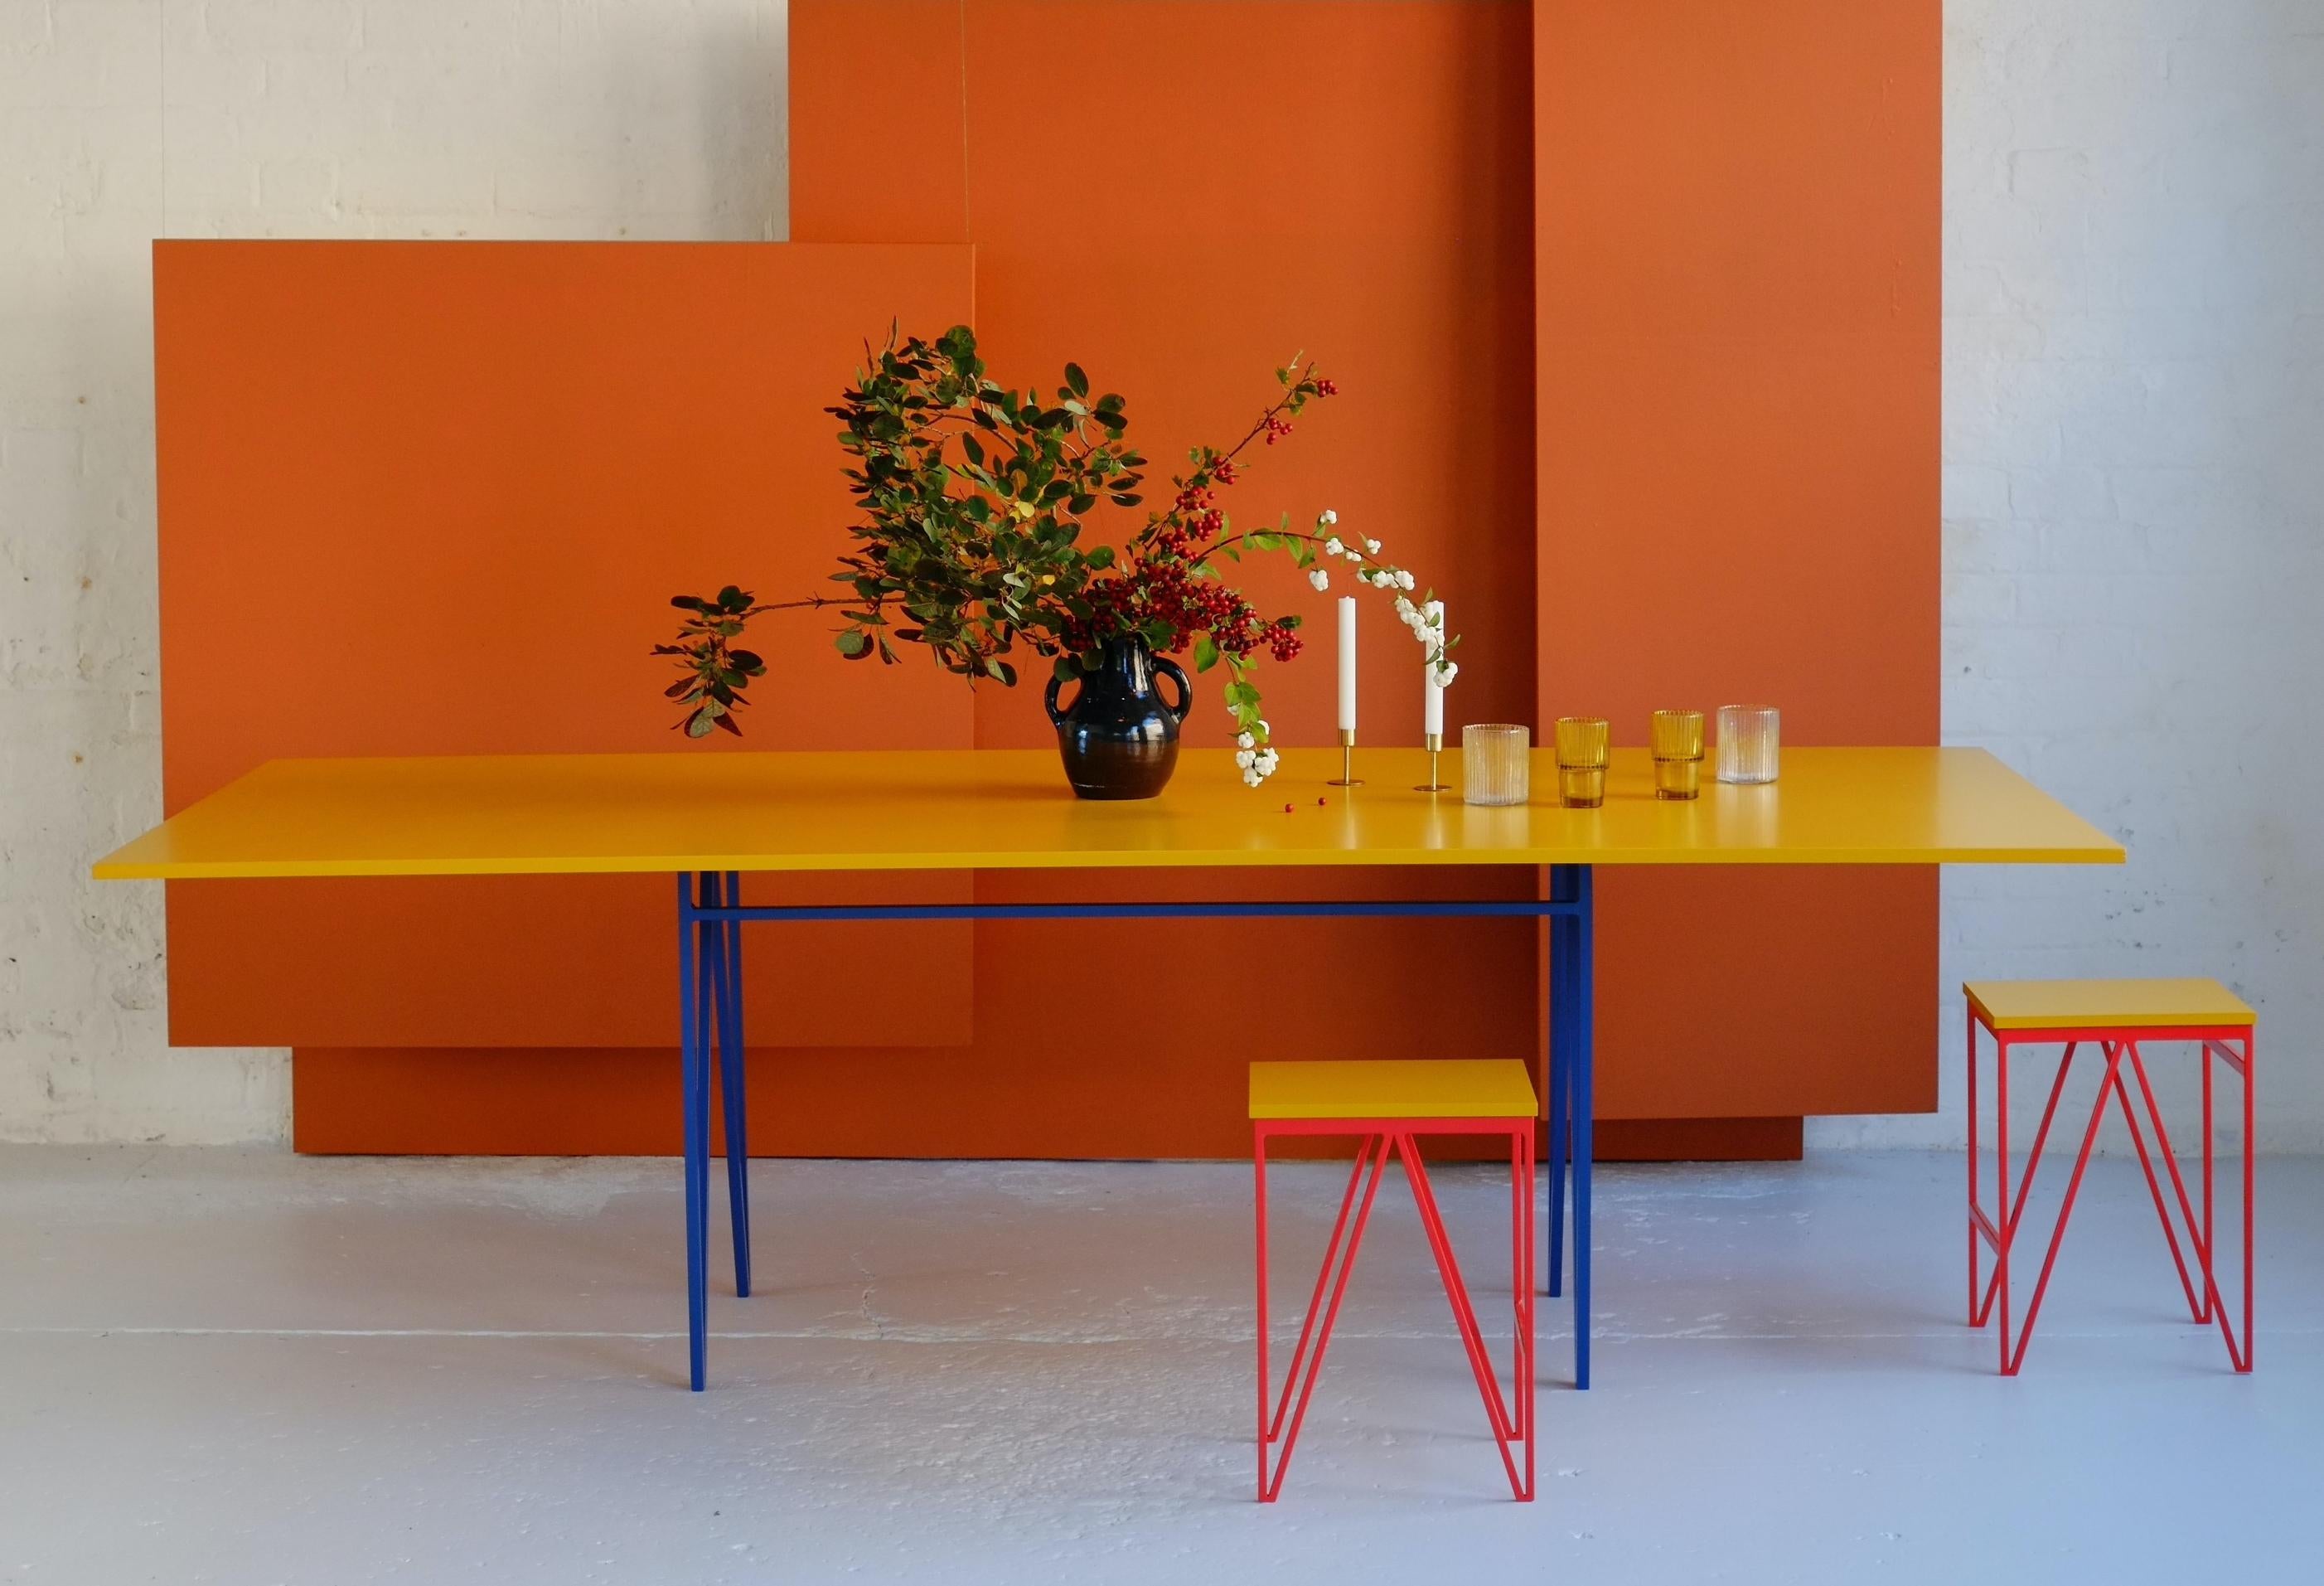 This Colour Play dining table is made with blueberry powder coated, solid steel leg frame legs with a contrasting deep yellow lacquered table top. The table top is finished with a food-safe lacquer which is skilfully applied onto a colour-matched